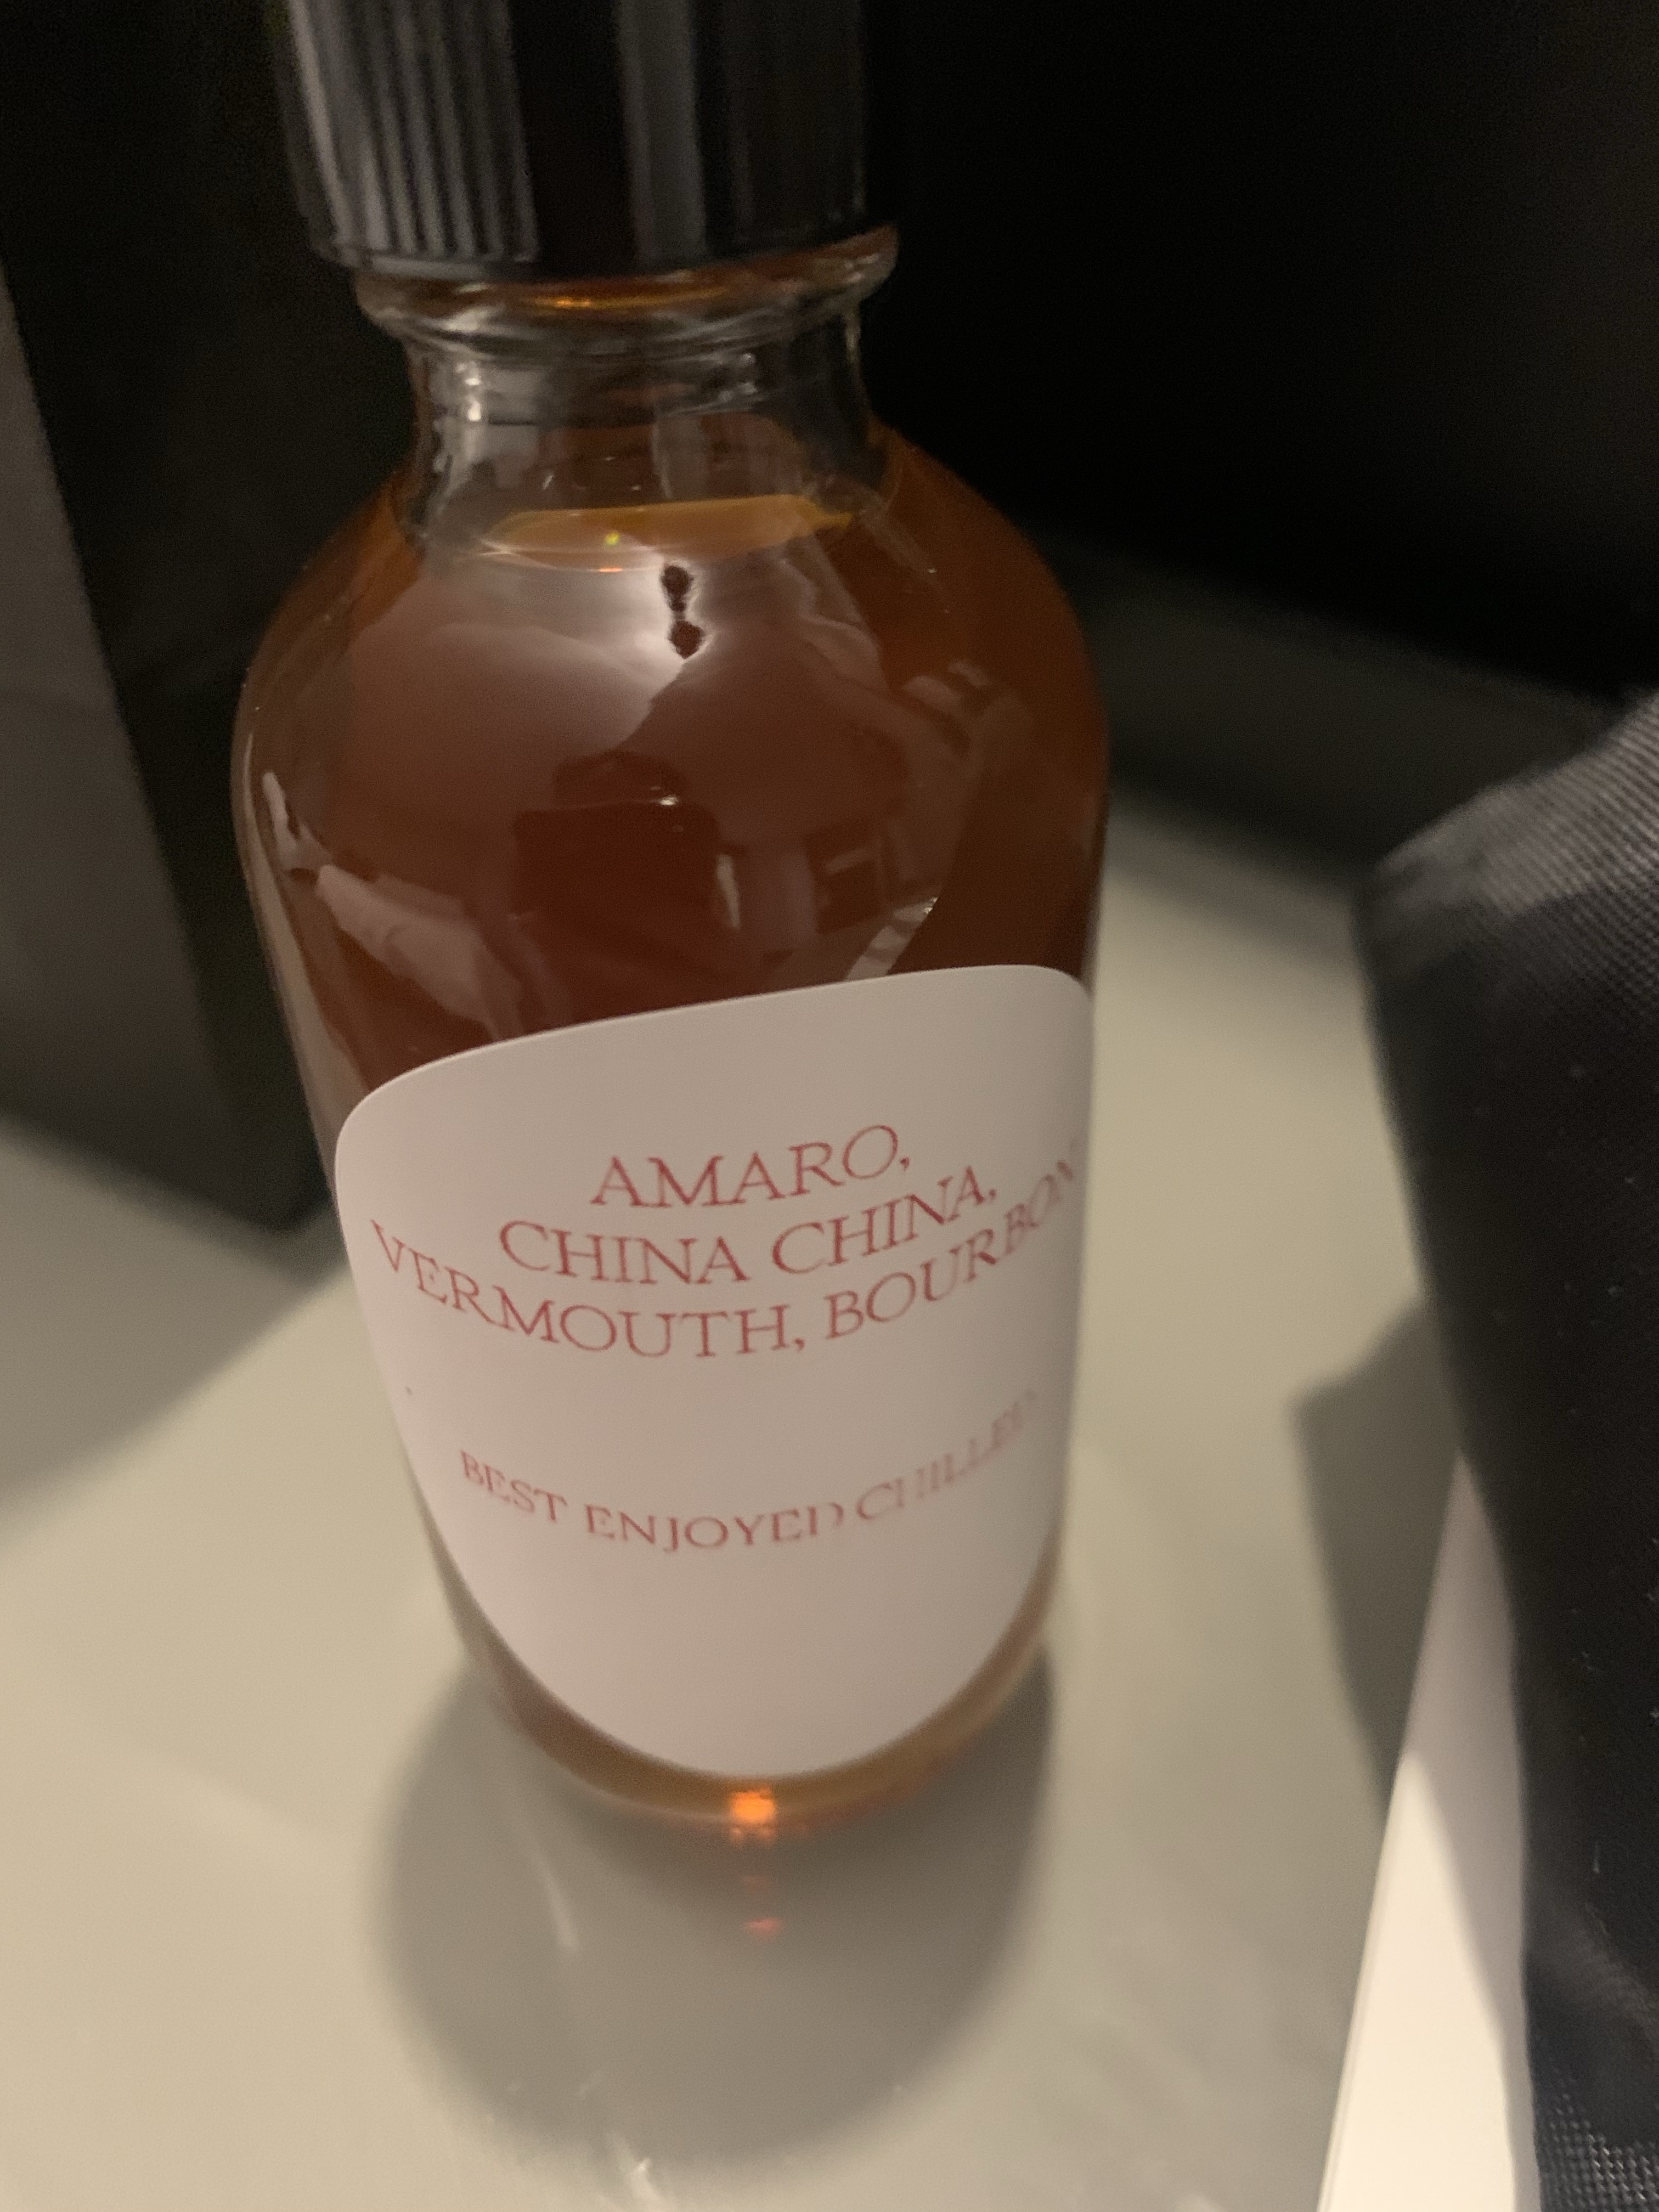 Bottled cocktail, with the ingredients listed as amaro, china china, vermouth, and bourbon. Best served chilled.